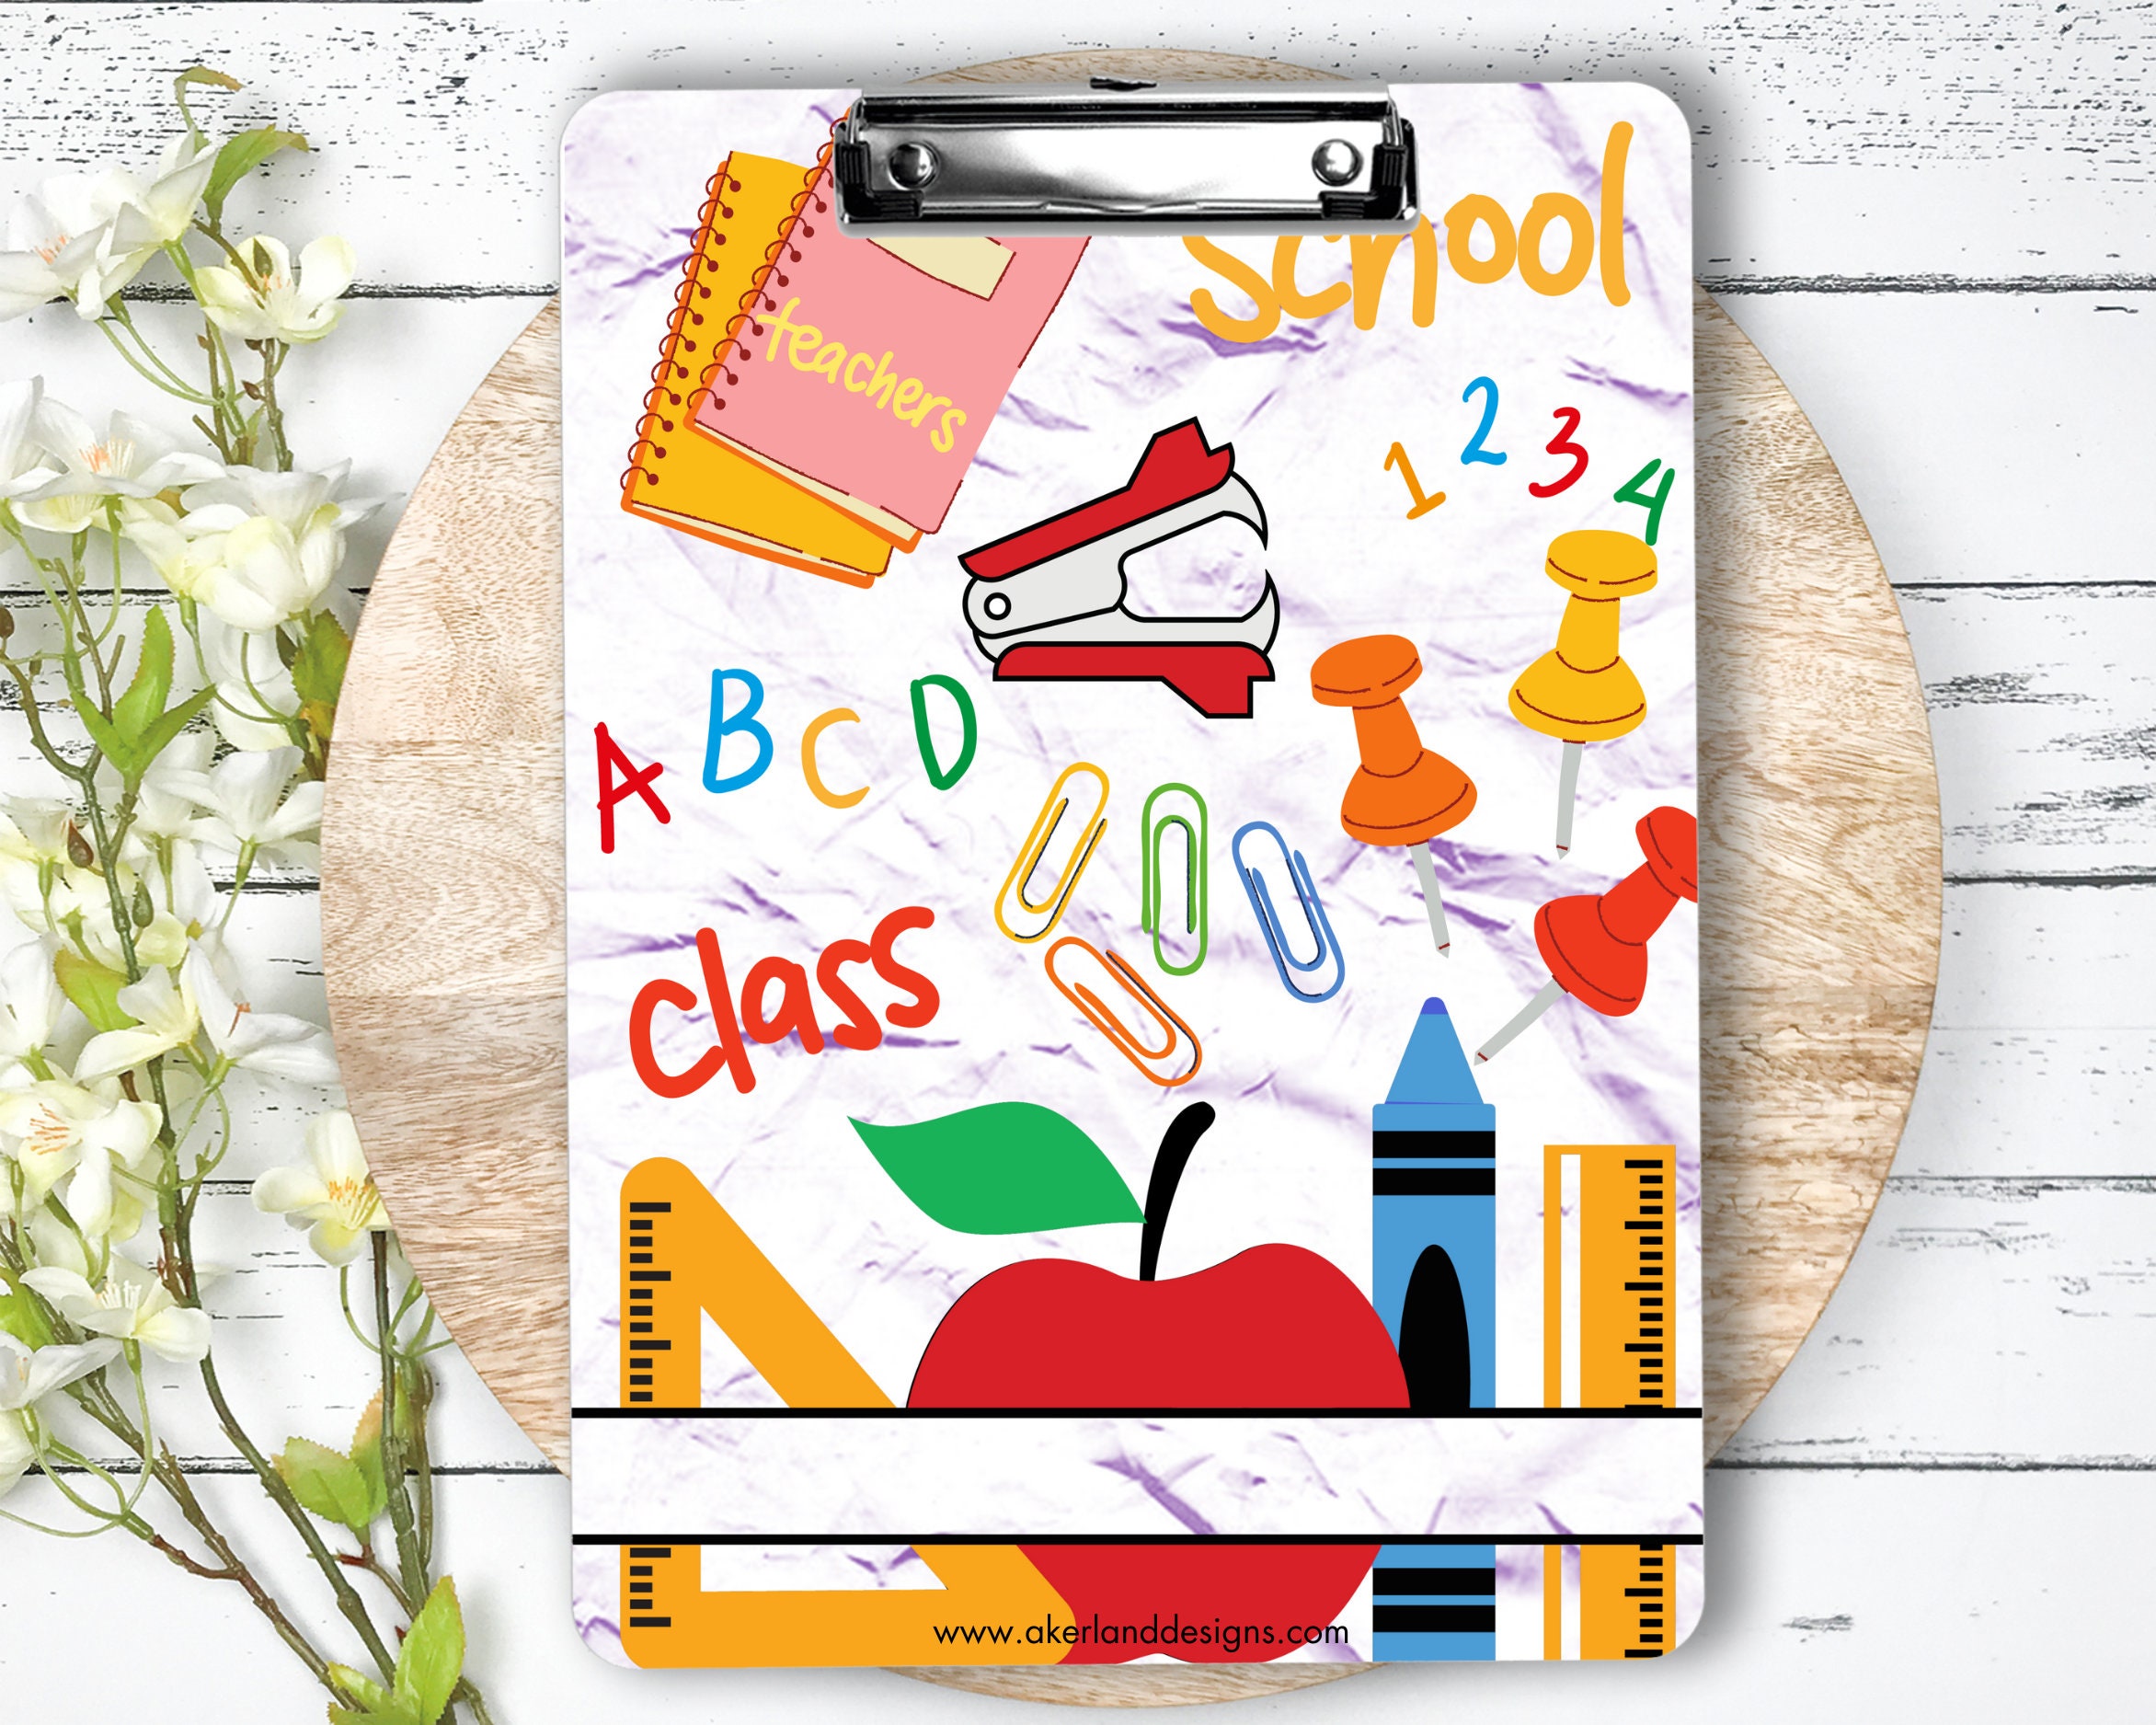 Sublimation Clipboard Blank White Clipboard File Standard A5